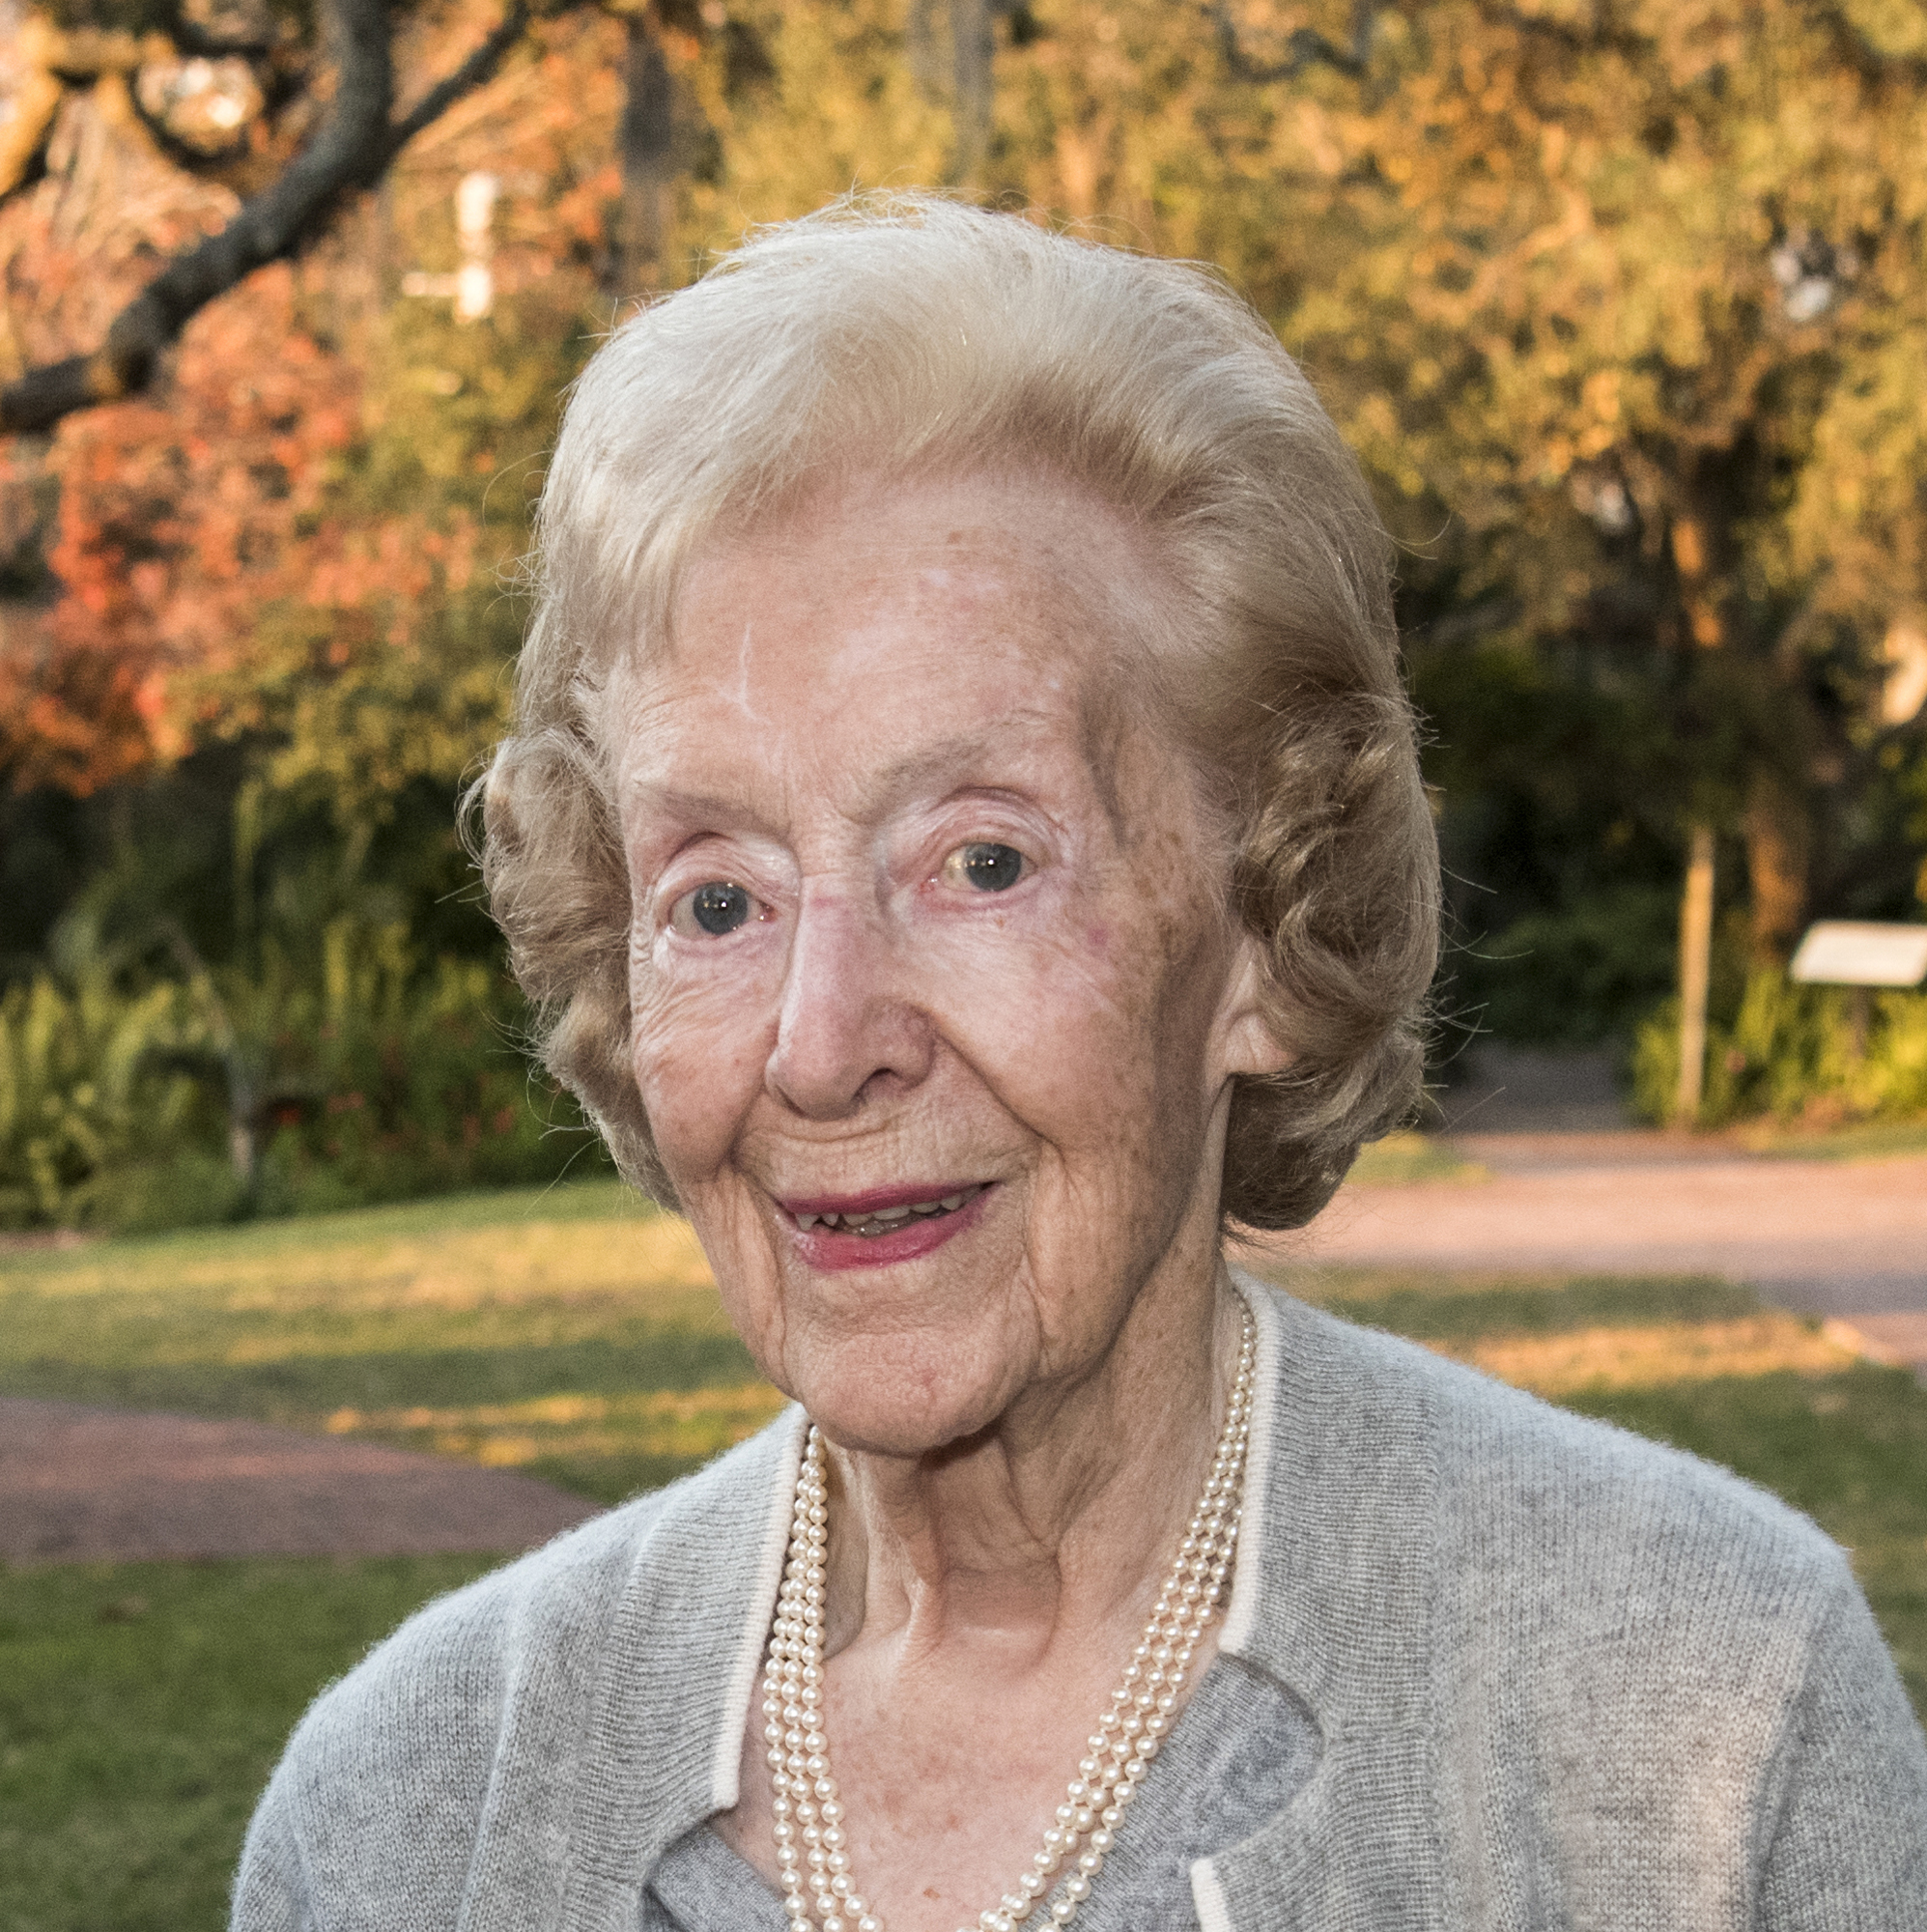 The late Evelyn Mink's generosity to Selby Gardens included 25 years of volunteering and an estate gift of $2.5 million. (Courtesy photo)